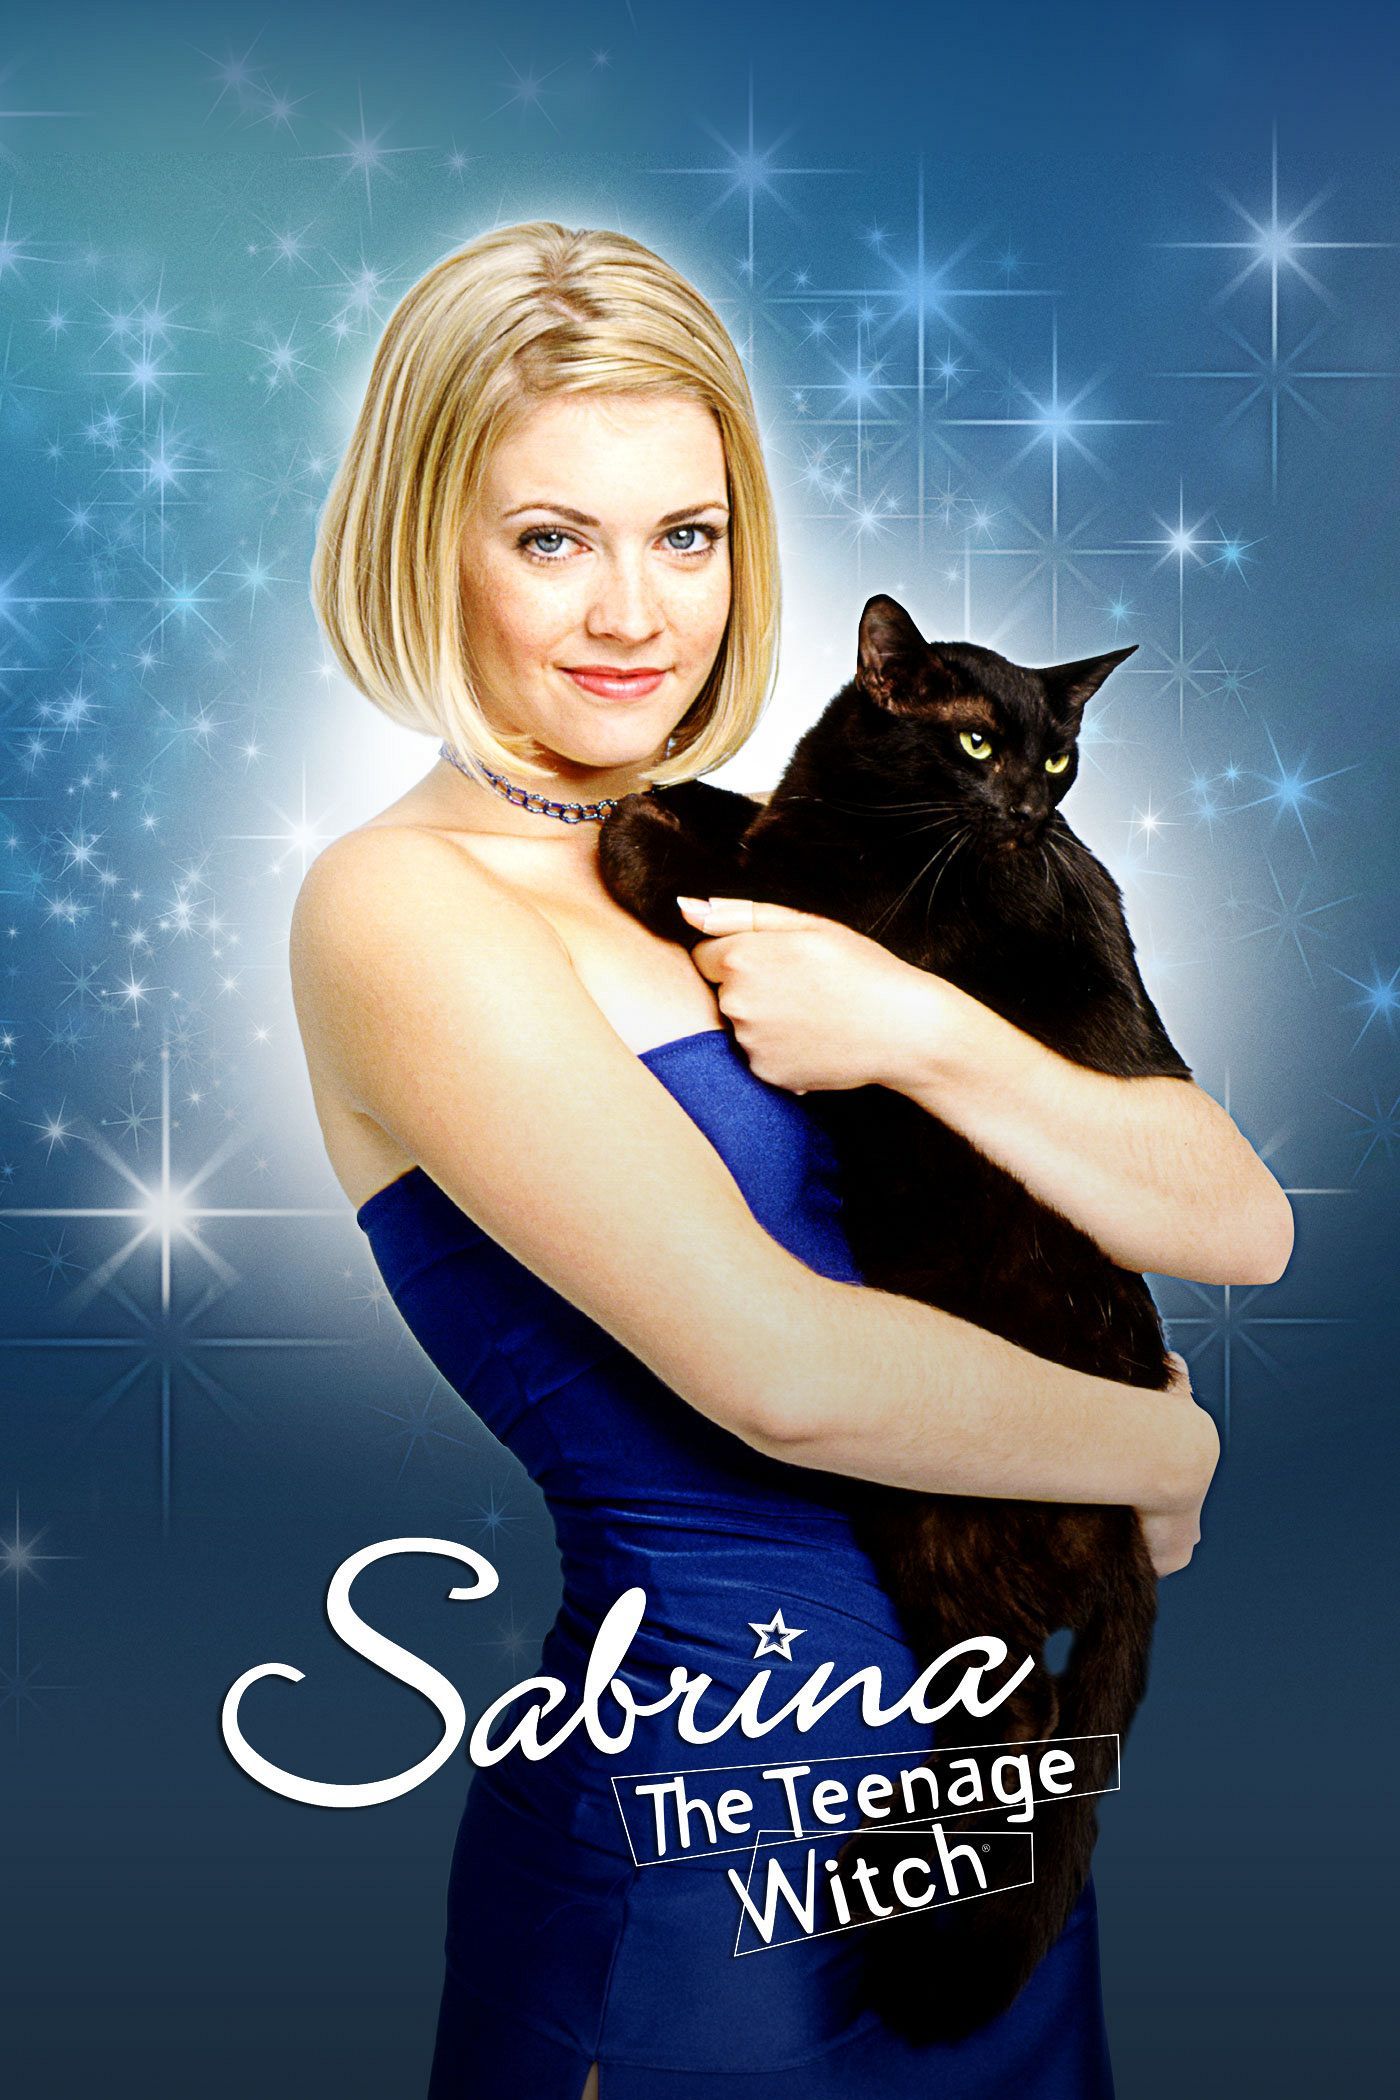 How Many Episodes Of Sabrina The Teenage Witch Are There - Sabrina, the Teenage Witch | TVmaze